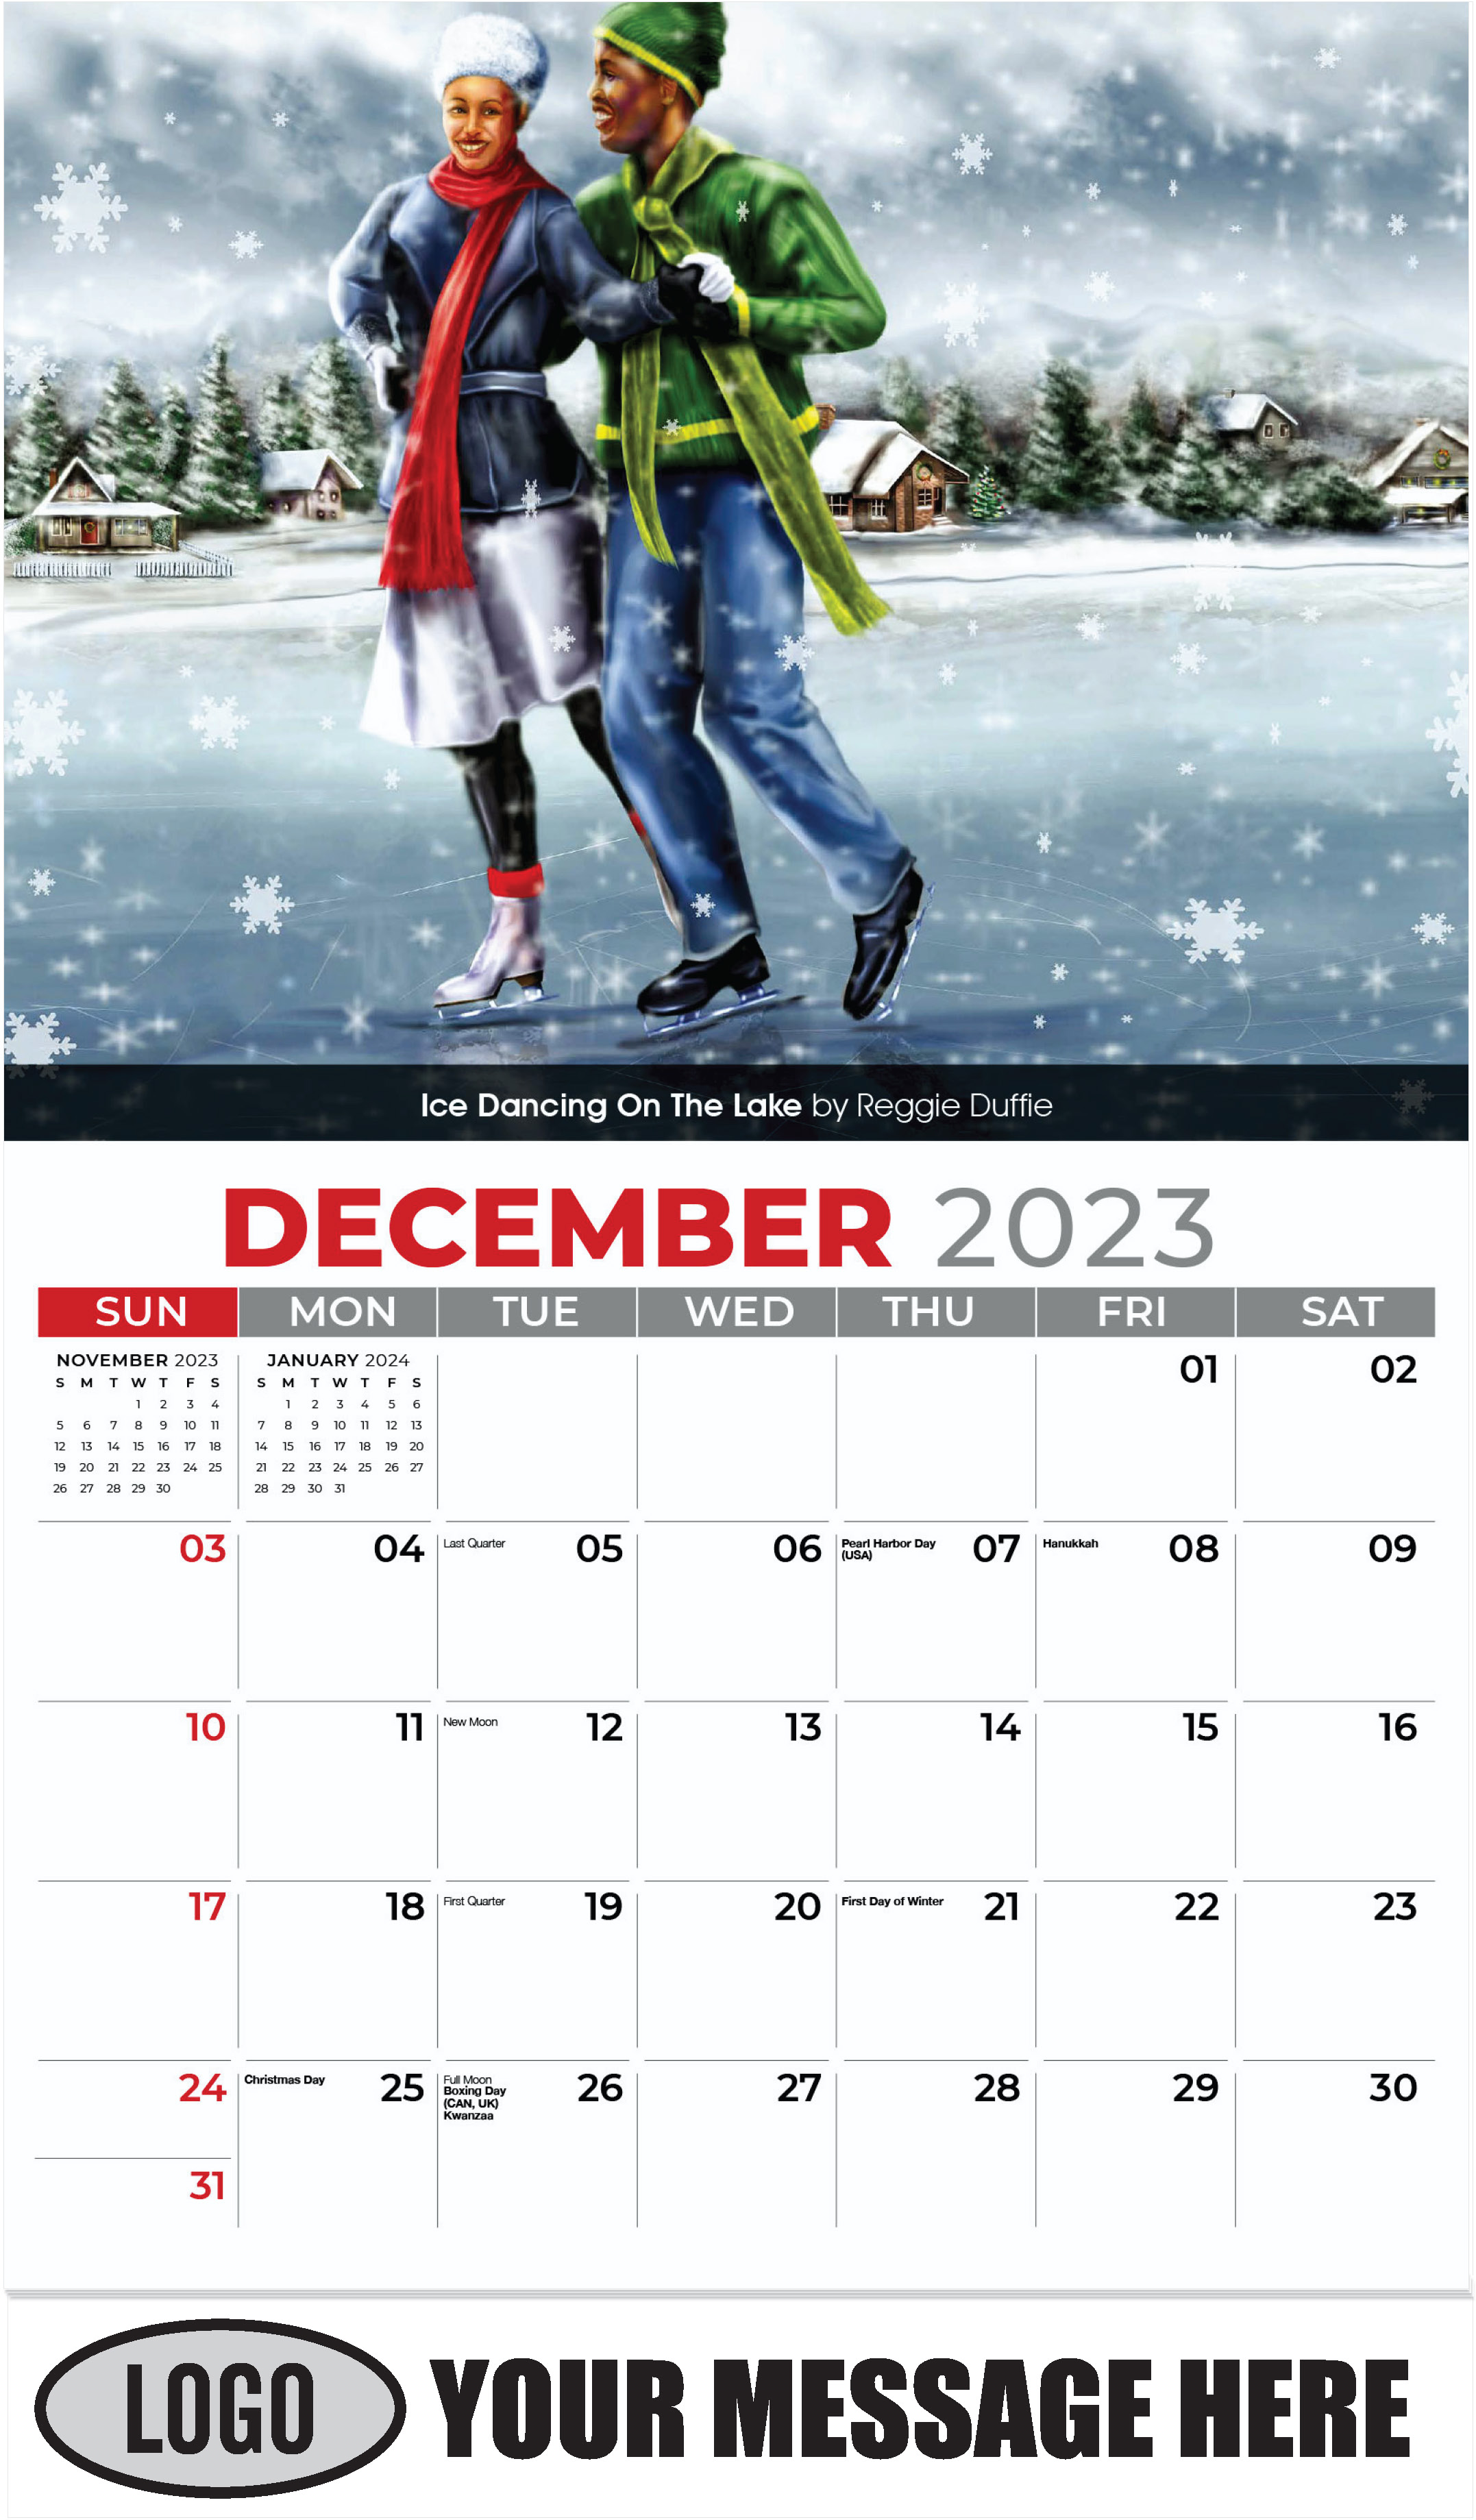 Ice Dancing On The Lake by Reggie Duffie - December 2023 - Celebration of African American Art 2023 Promotional Calendar